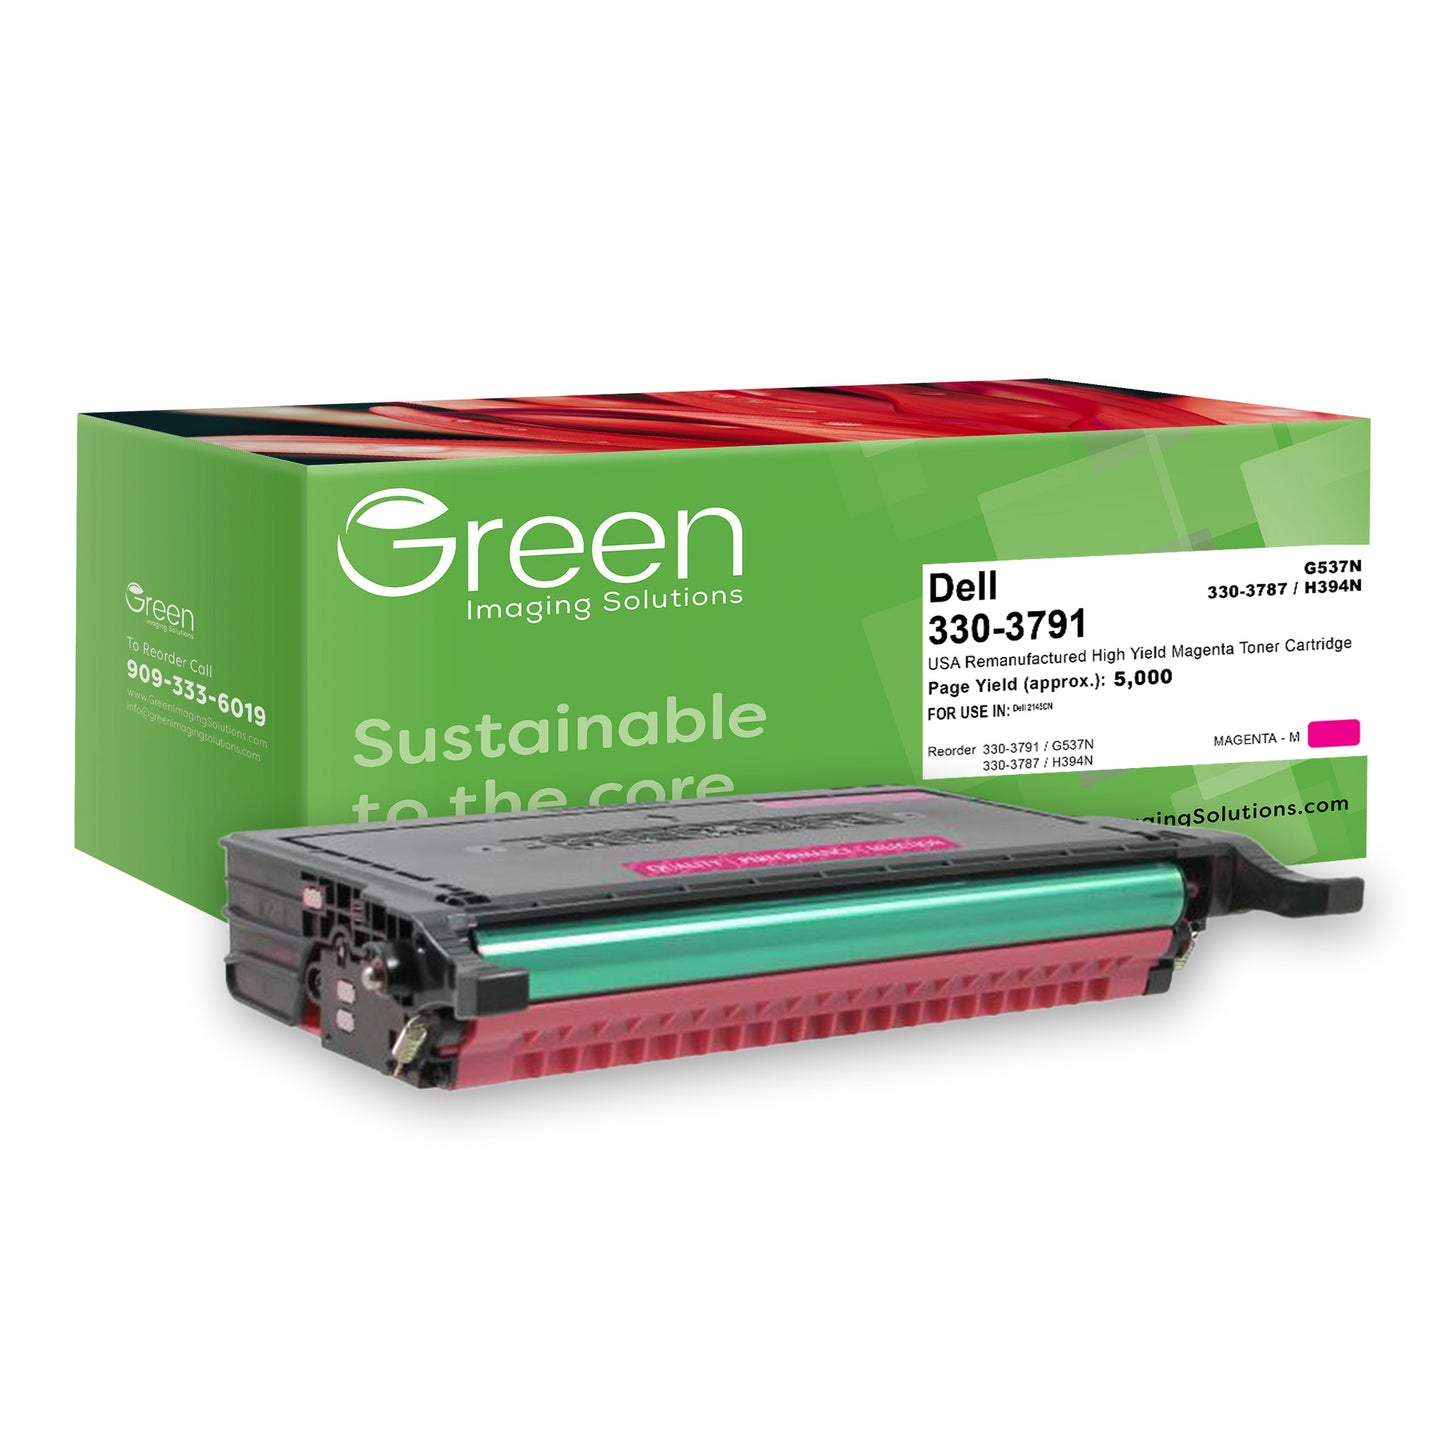 Green Imaging Solutions USA Remanufactured High Yield Magenta Toner Cartridge for Dell 2145